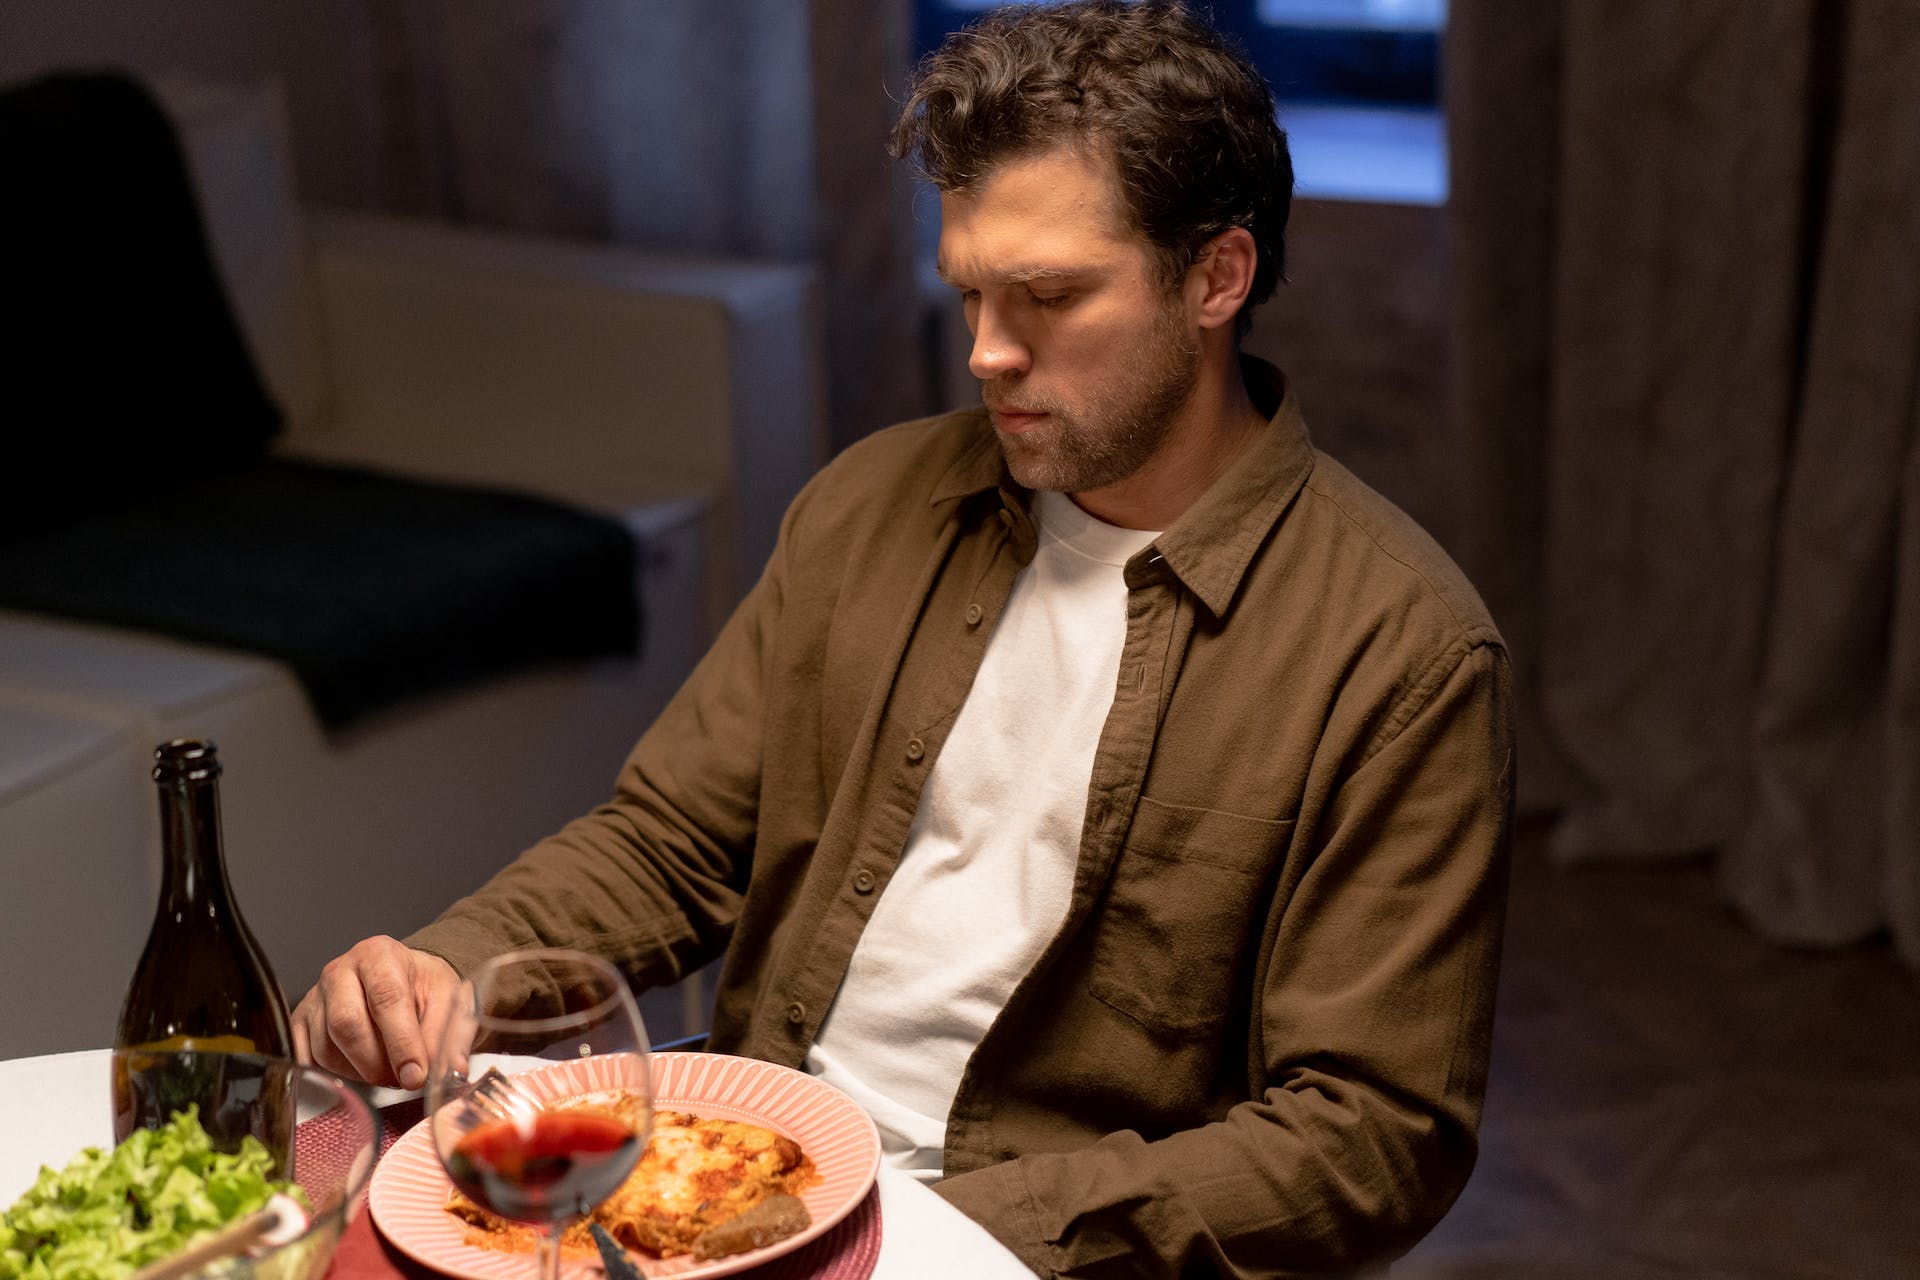 An angry man sitting at the dinner table | Source: Pexels